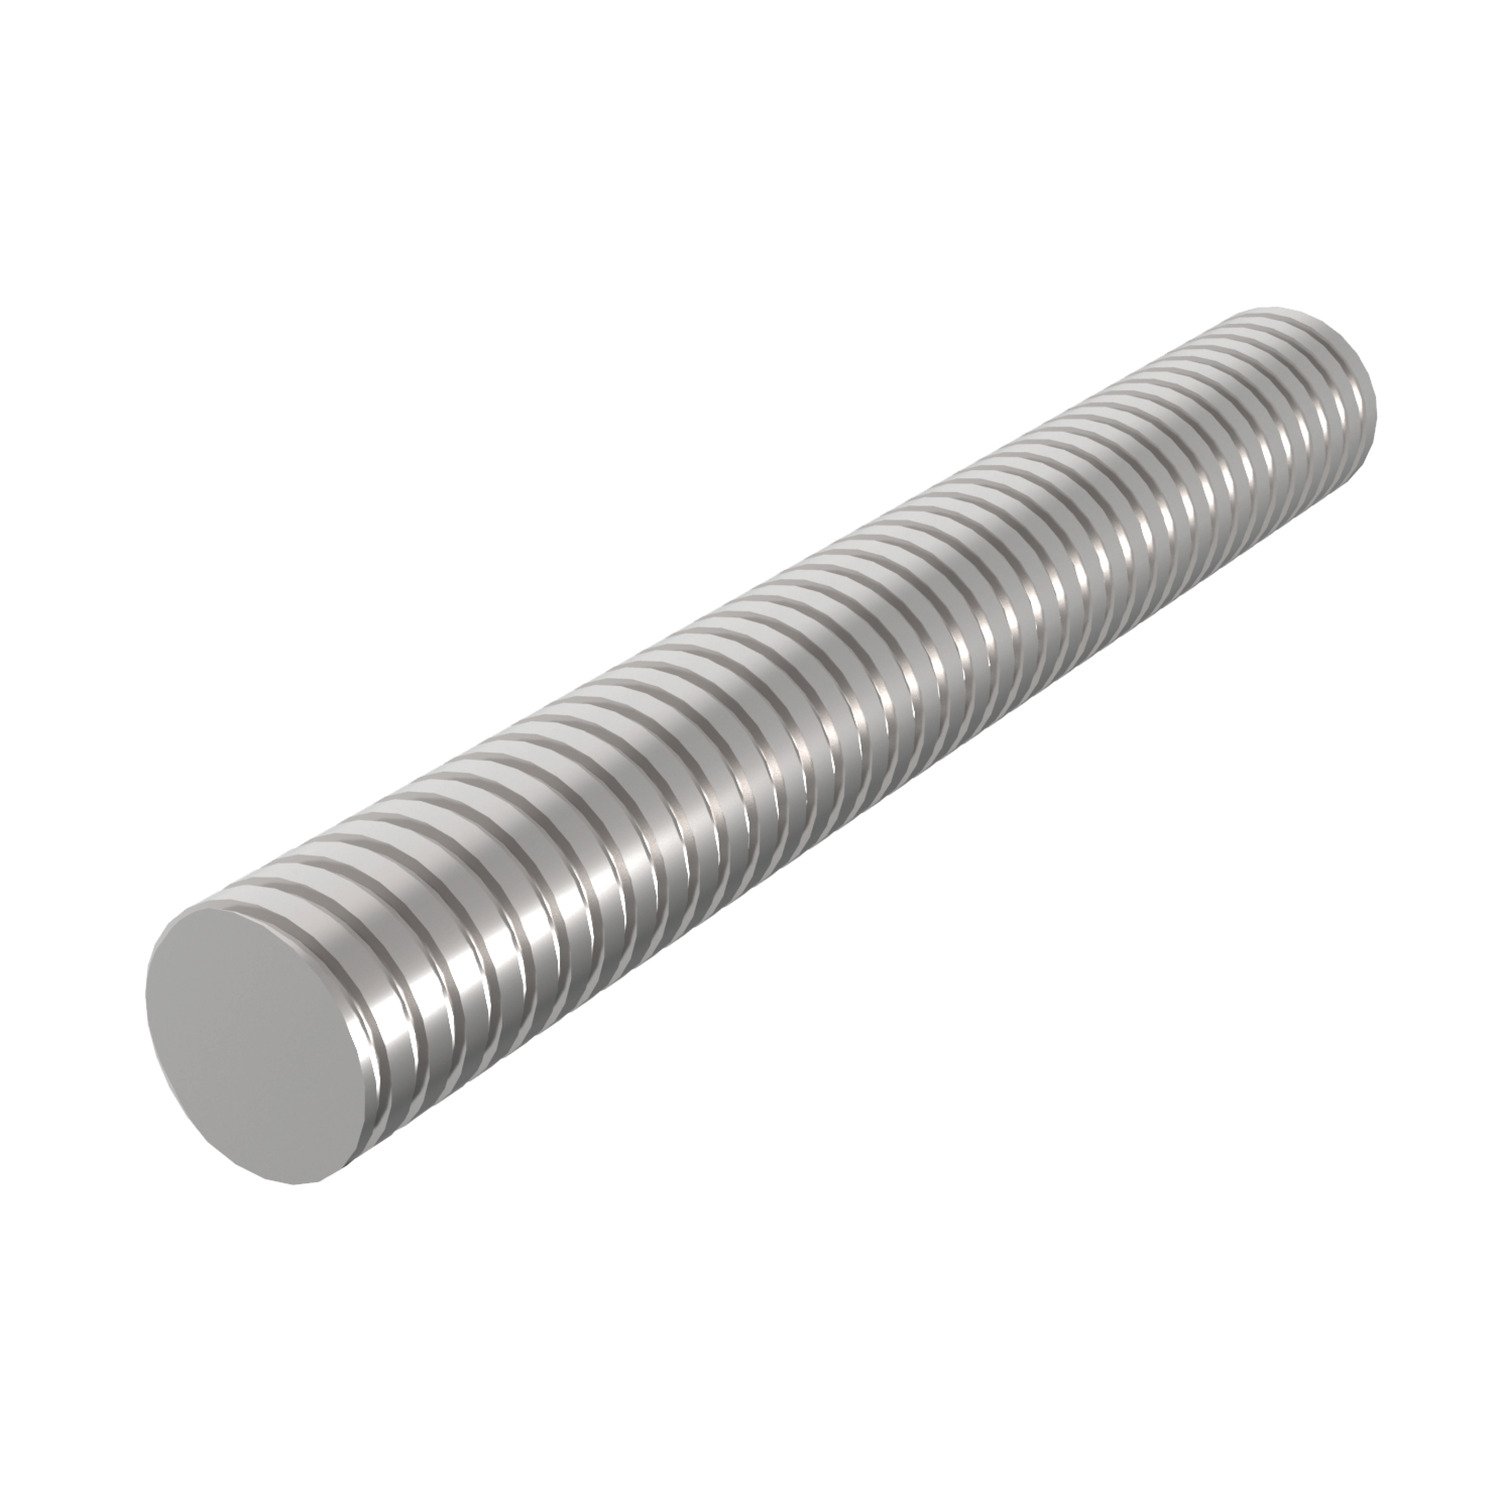 Stainless 316  Lead Screws Rolled trapezoidal AISI 316 grade (A4) stainless lead screws, right hand thread. Surface hardness 280HB. Lengths of up to 6 meters can be provided. Tr 10 to Tr 120.